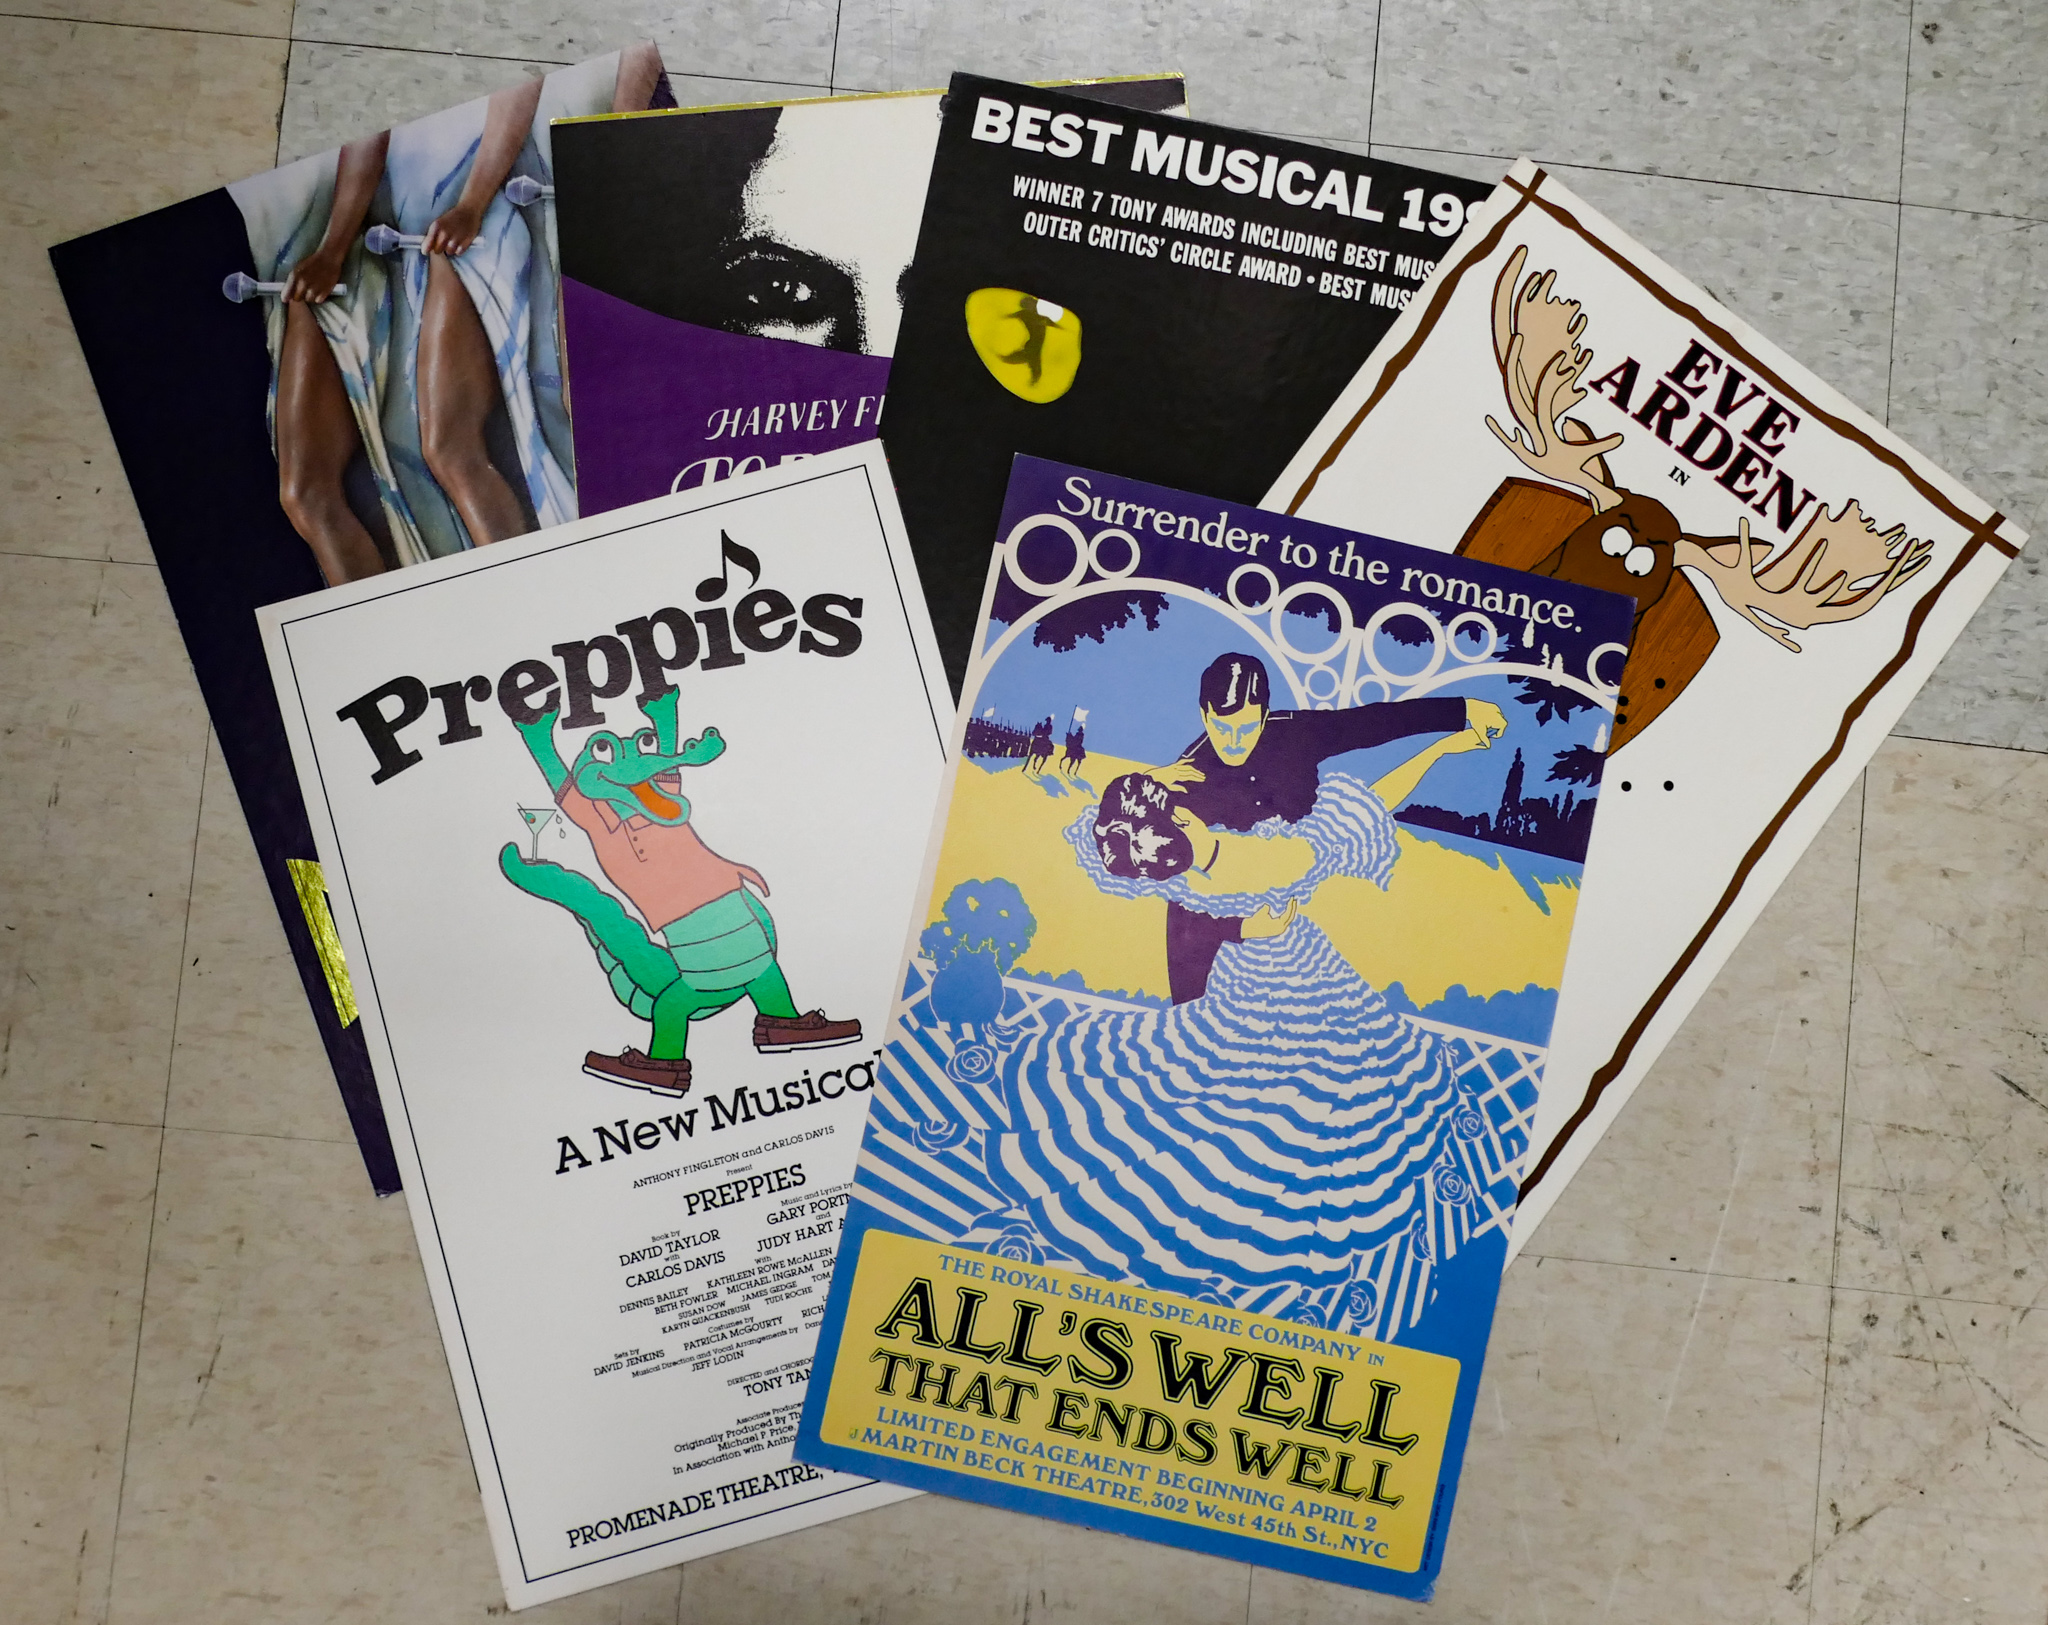 8pc Musical Theatre Broadside Posters